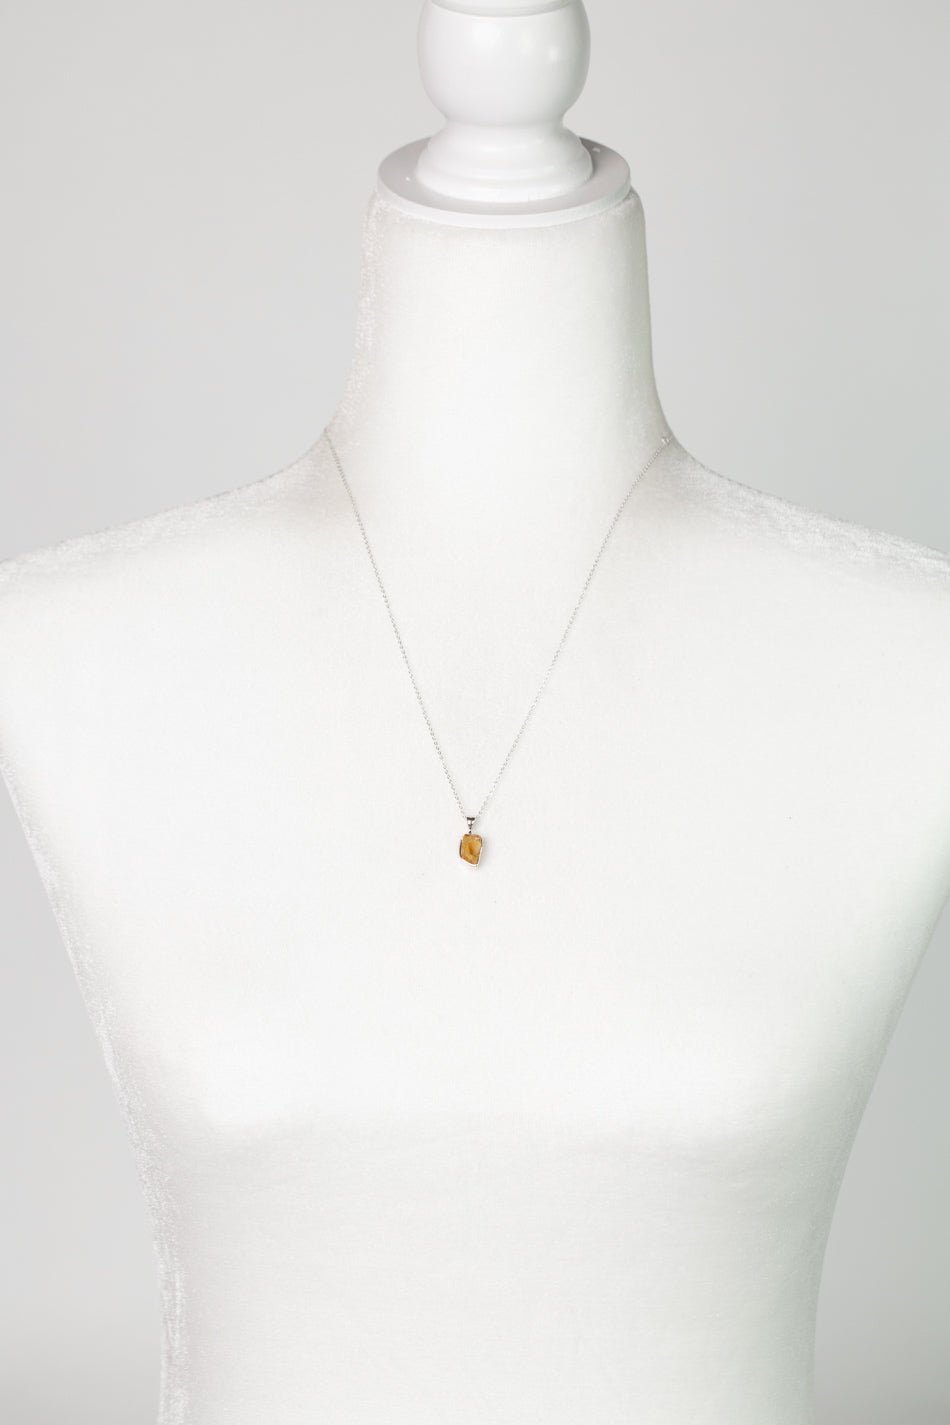 Birthstone 16-20.5" November Natural Citrine Pendant Necklace And Earrings Set